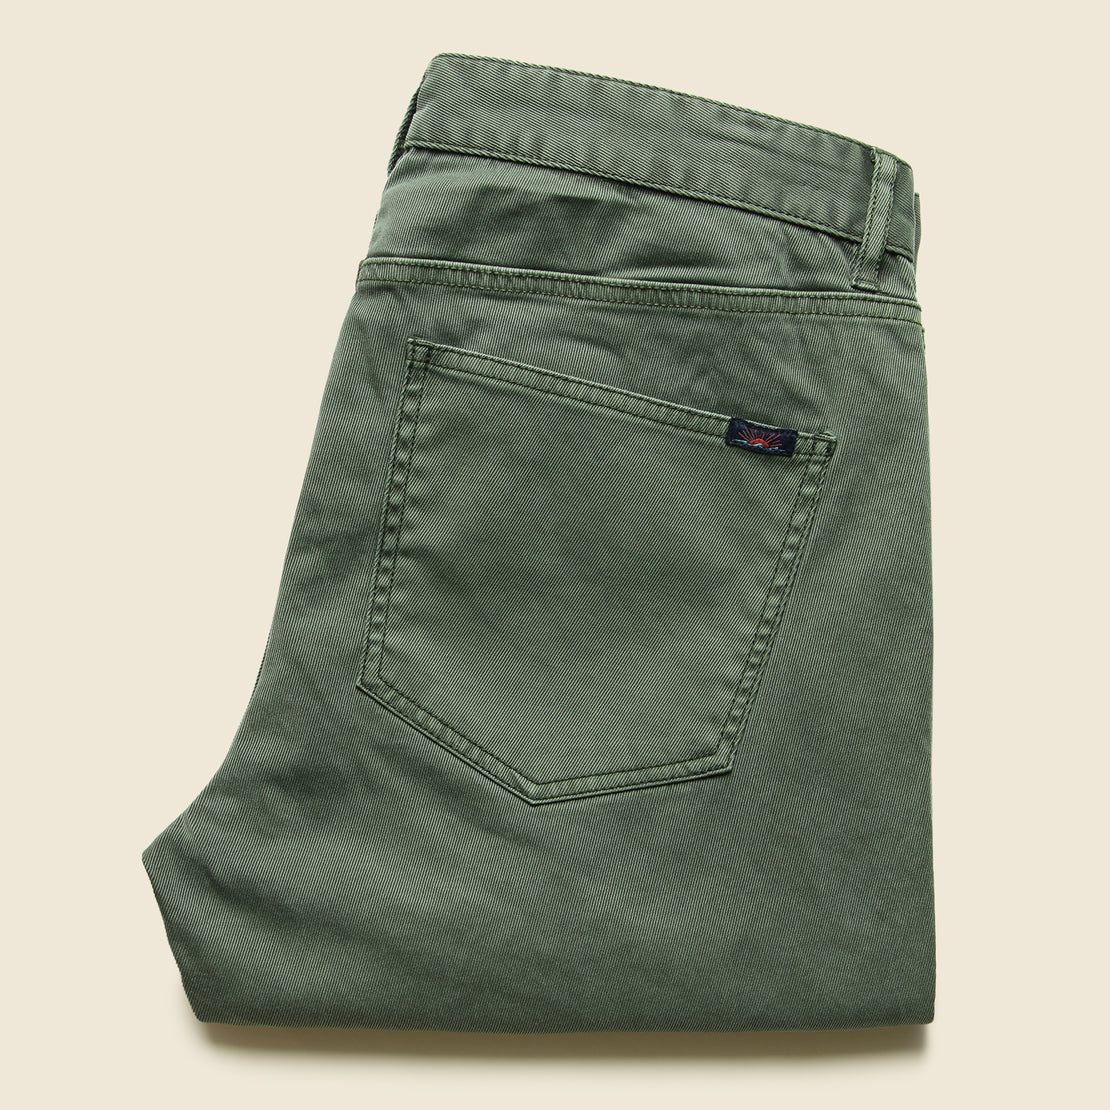 Comfort Twill Jean - Hunter Green - Faherty - STAG Provisions - Pants - Twill